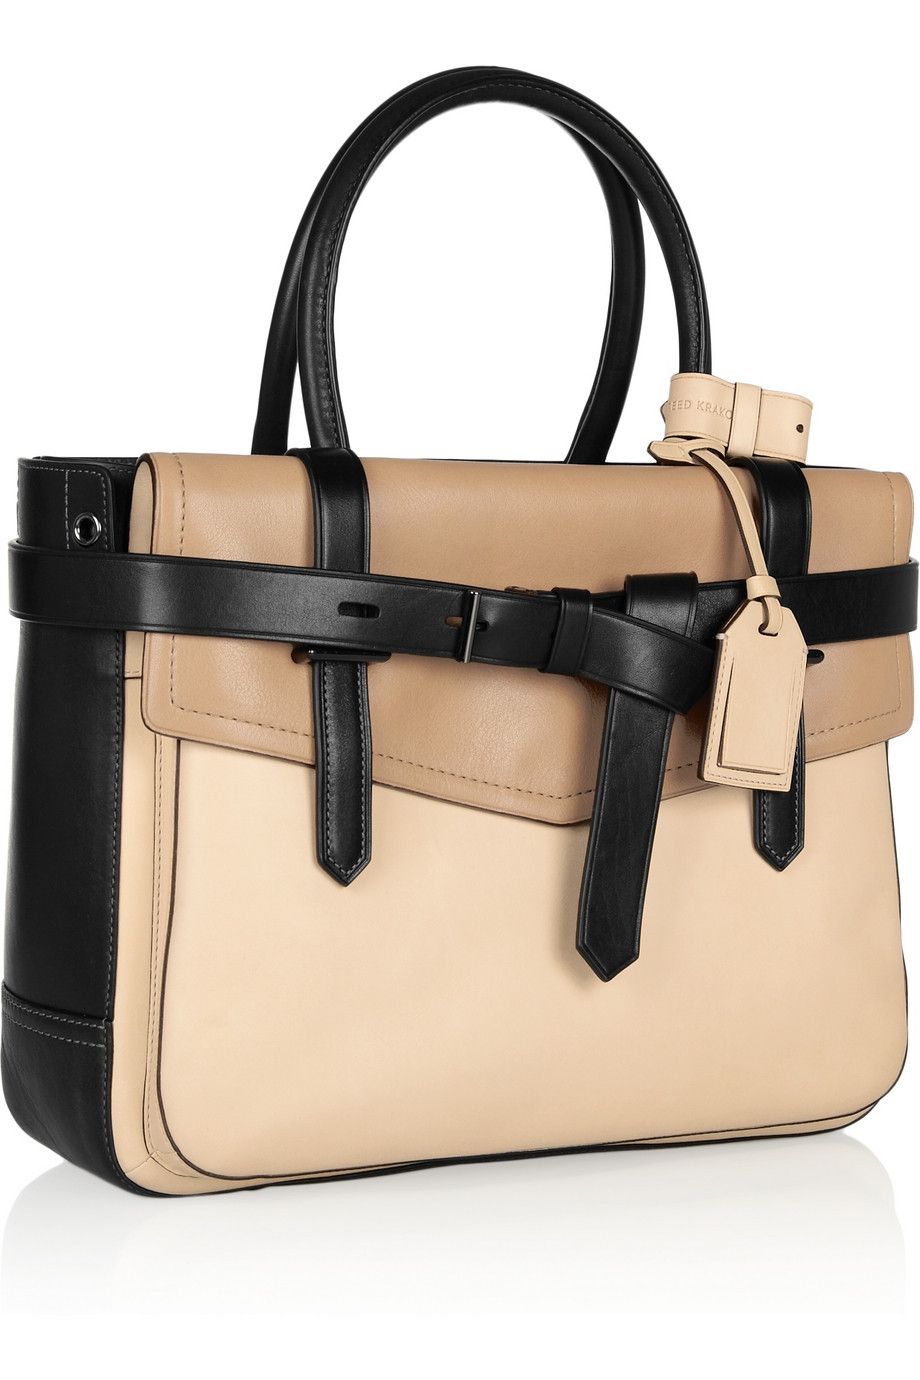 Reed Krakoff | Boxer leather tote